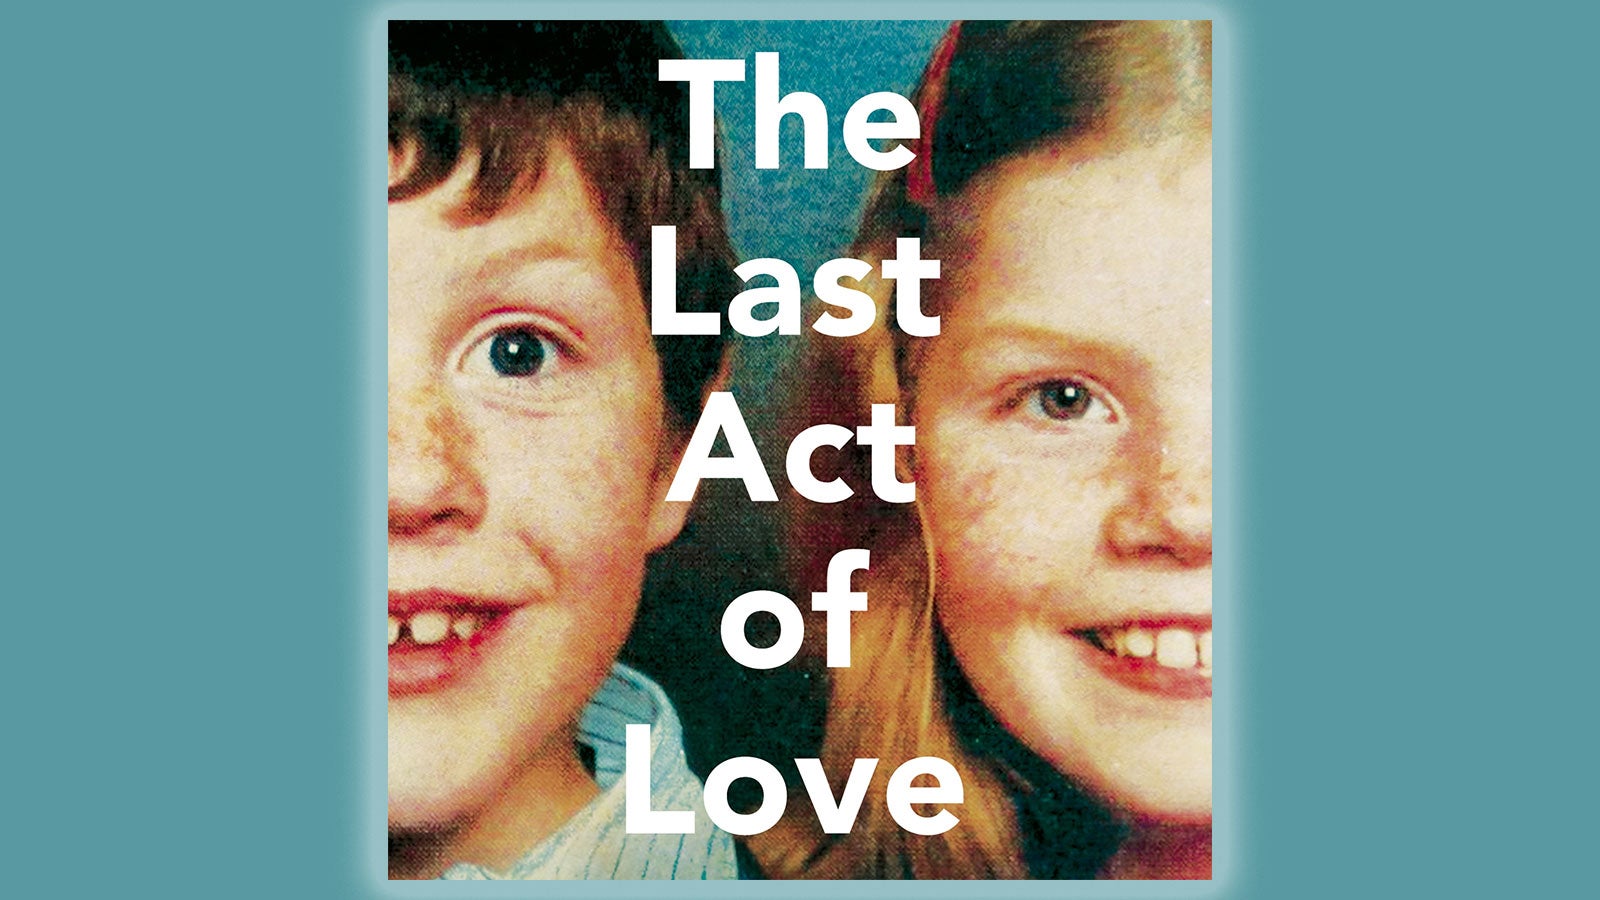 The Last Act of Love Book Jacket on a blue background